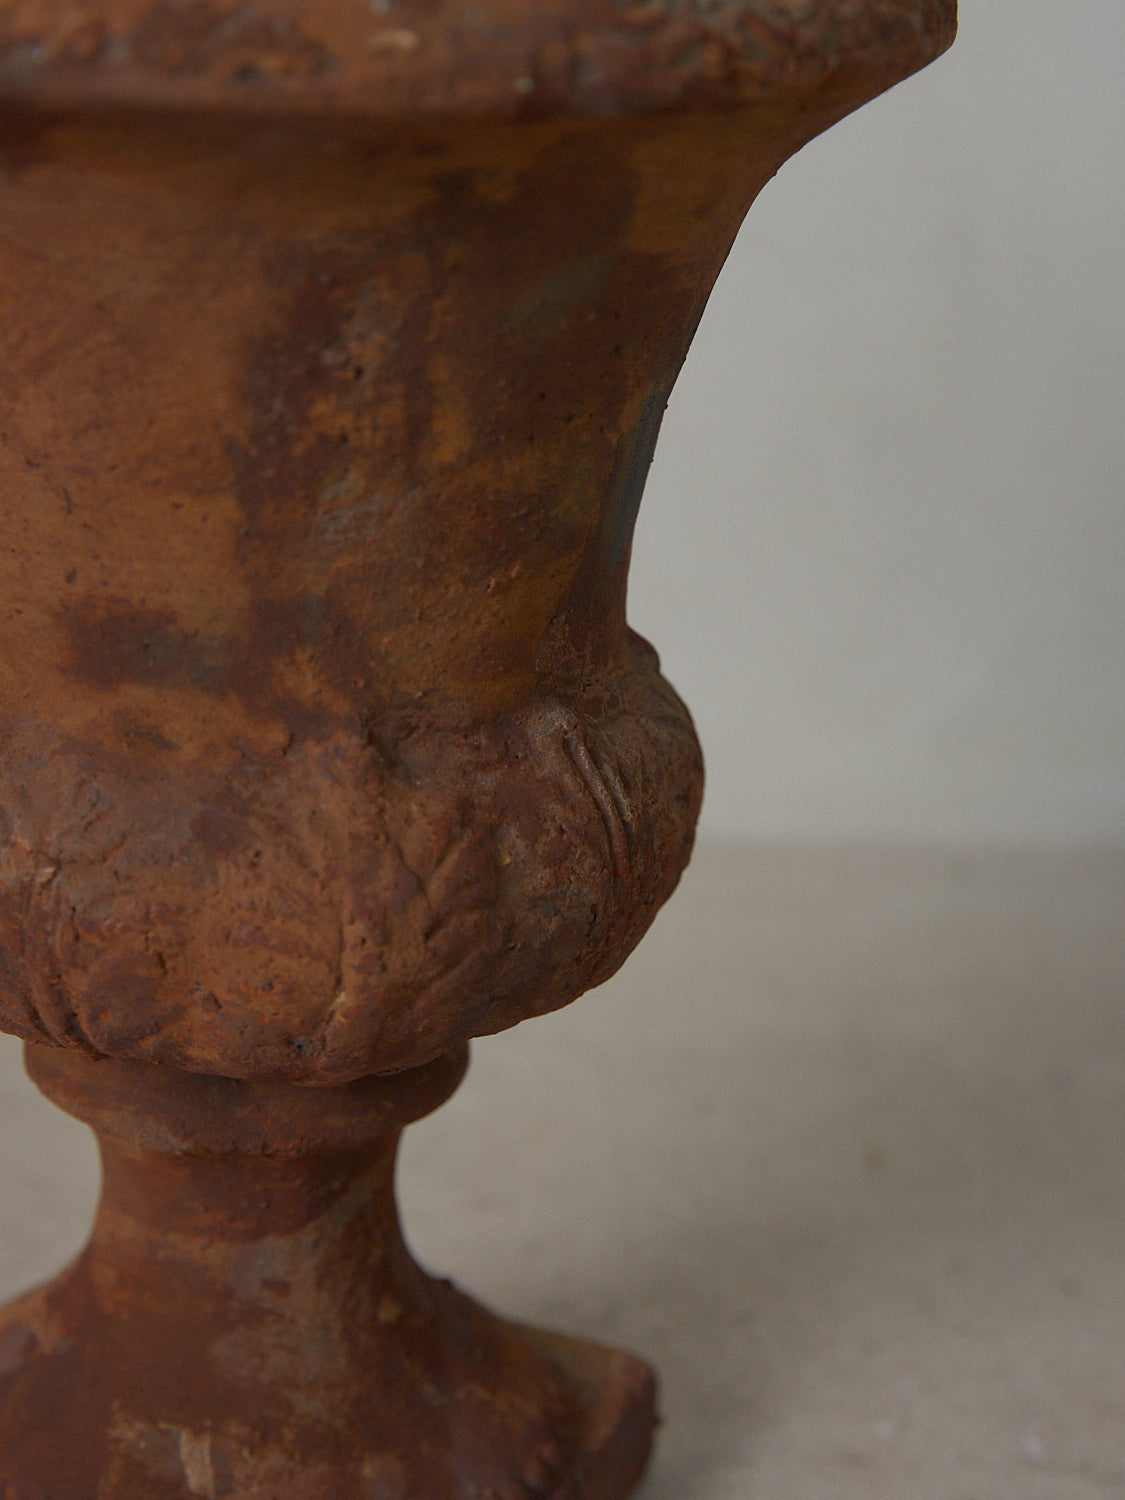 Vase Rose. Tabletop pedestal urn in a classical Grecian shape with decorative beading and leaf pattern details throughout.